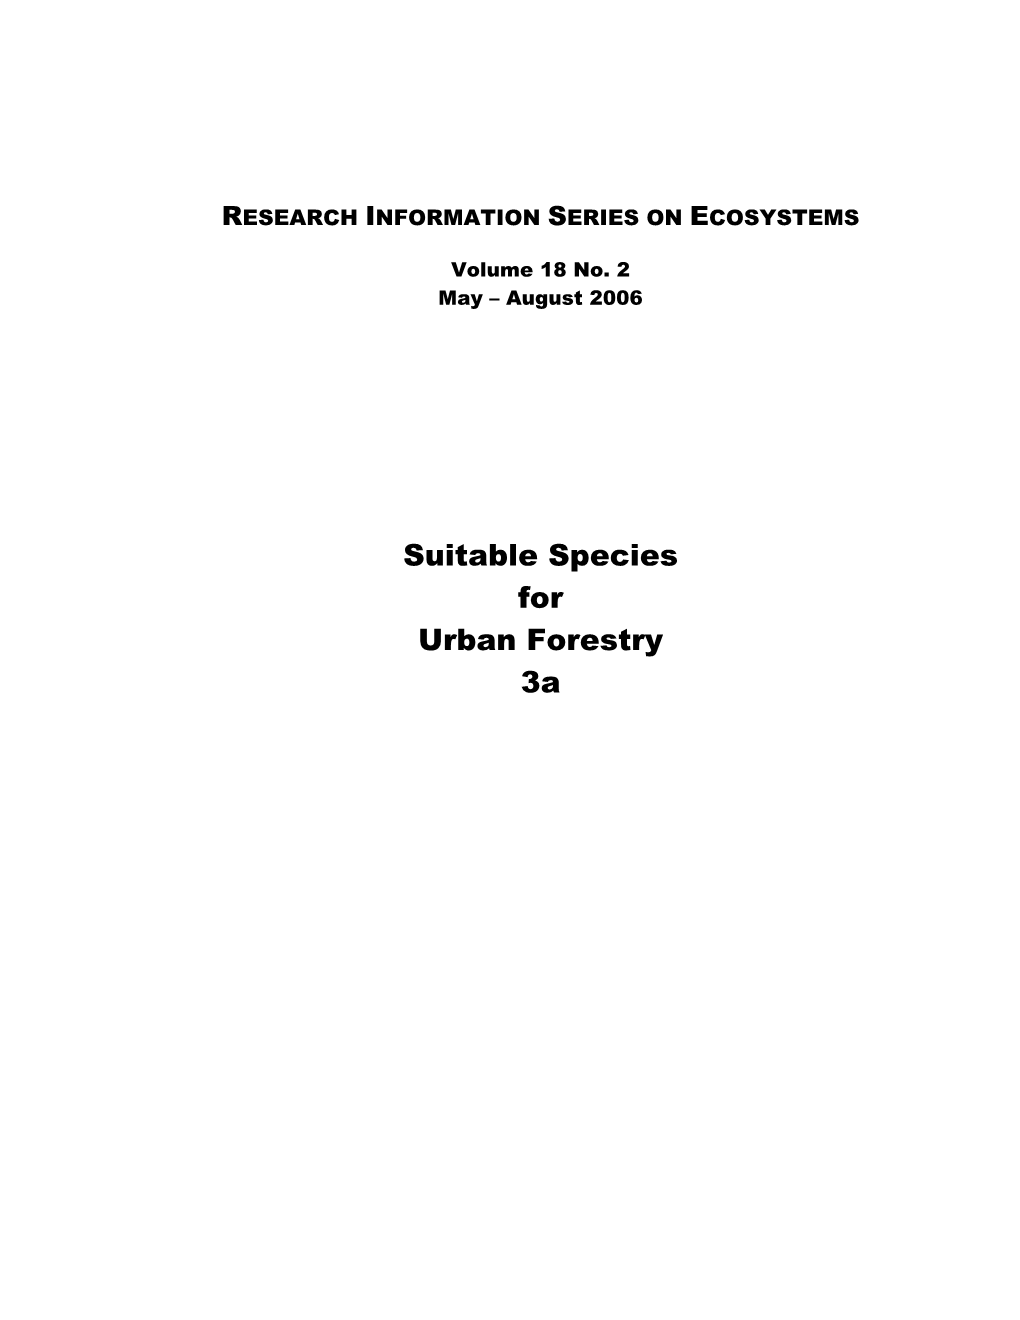 Suitable Species for Urban Forestry 3A